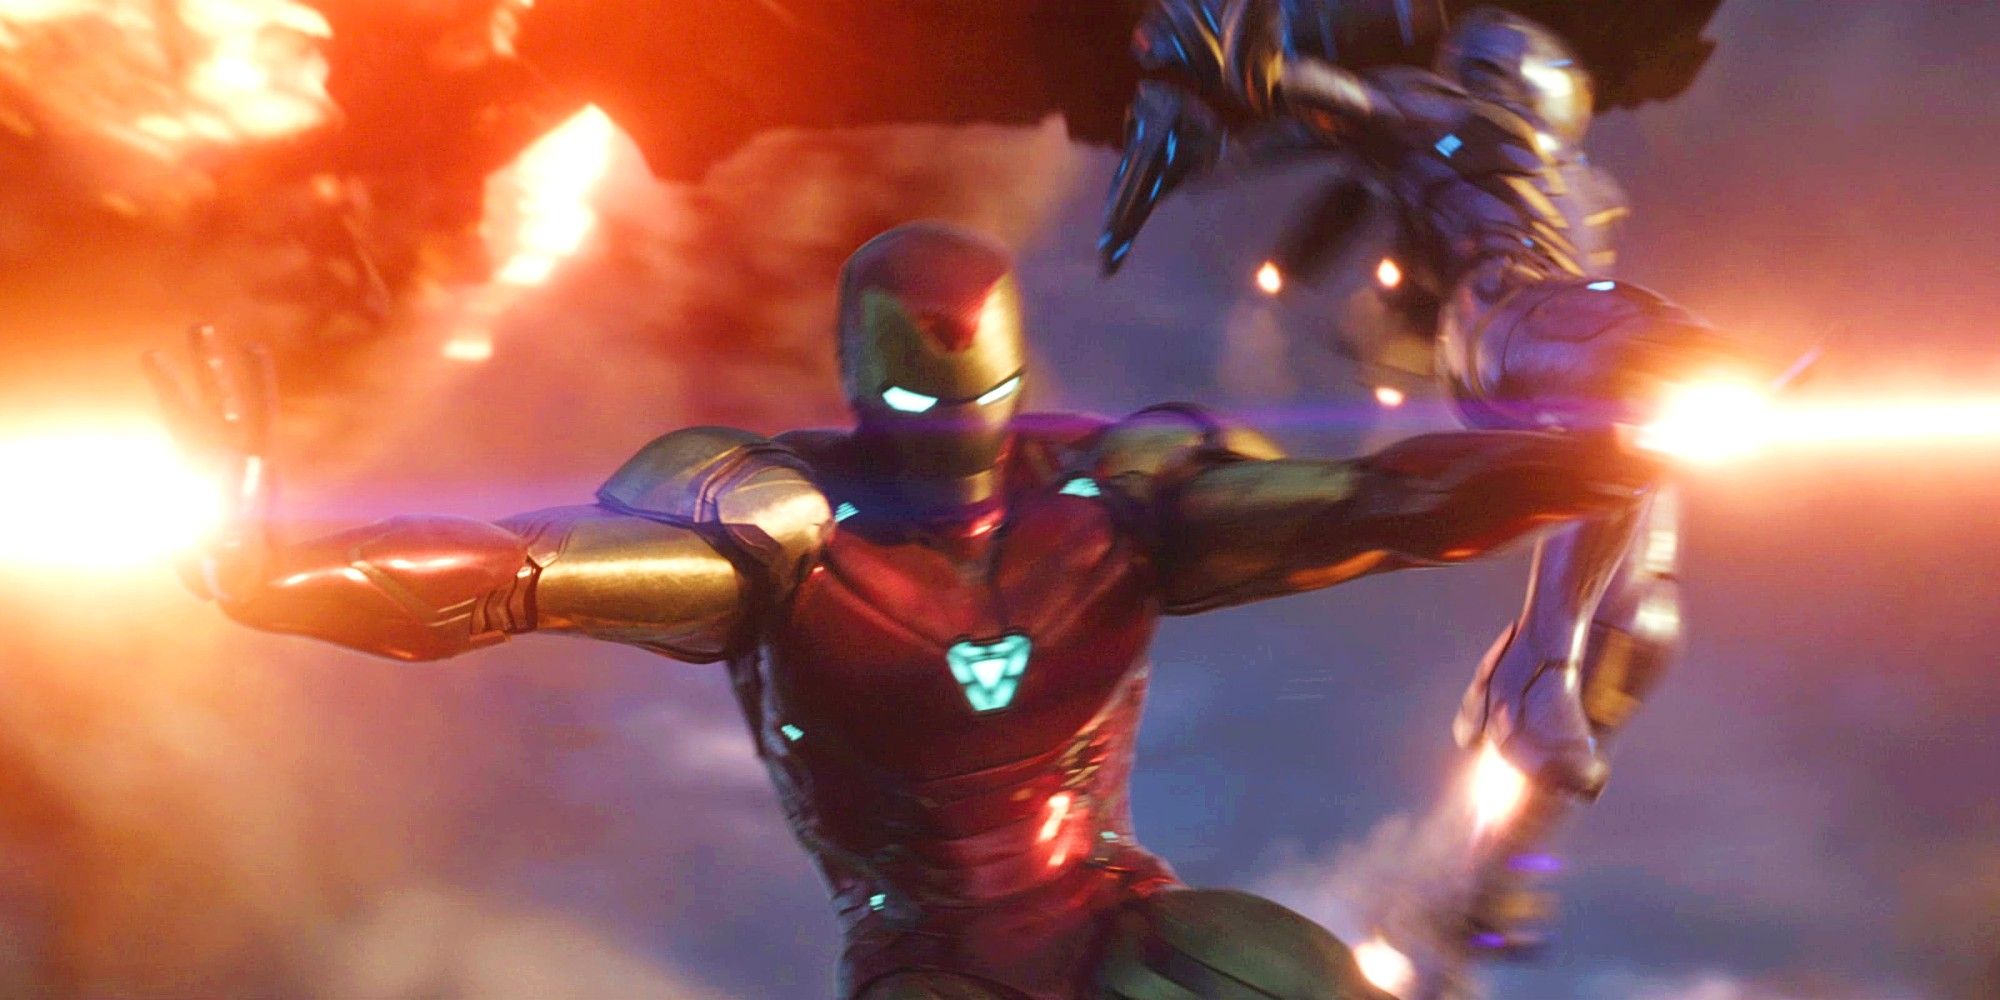 Iron Man Firing Blasts Out of Both Hands in Avengers Endgame Final Battle